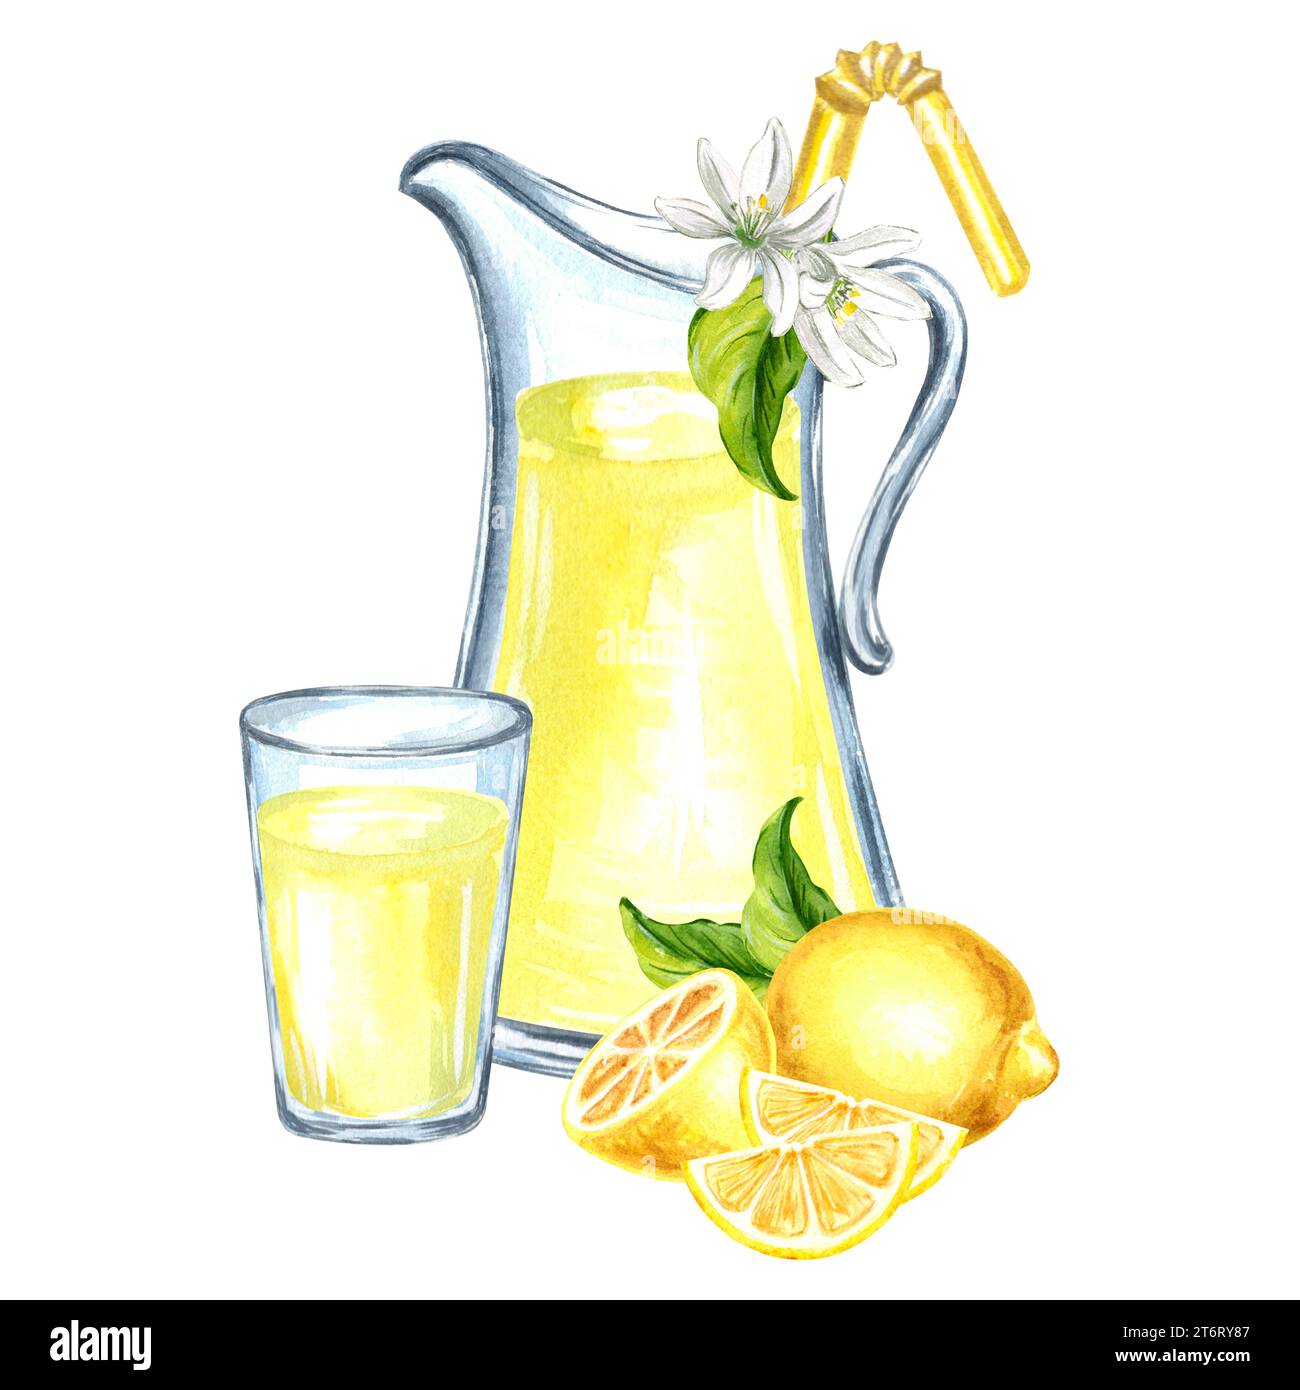 https://c8.alamy.com/comp/2T6RY87/composition-of-jug-and-glass-with-lemonade-lemon-and-flowers-watercolor-hand-drawn-illustration-isolated-on-a-white-background-for-design-stickers-2T6RY87.jpg